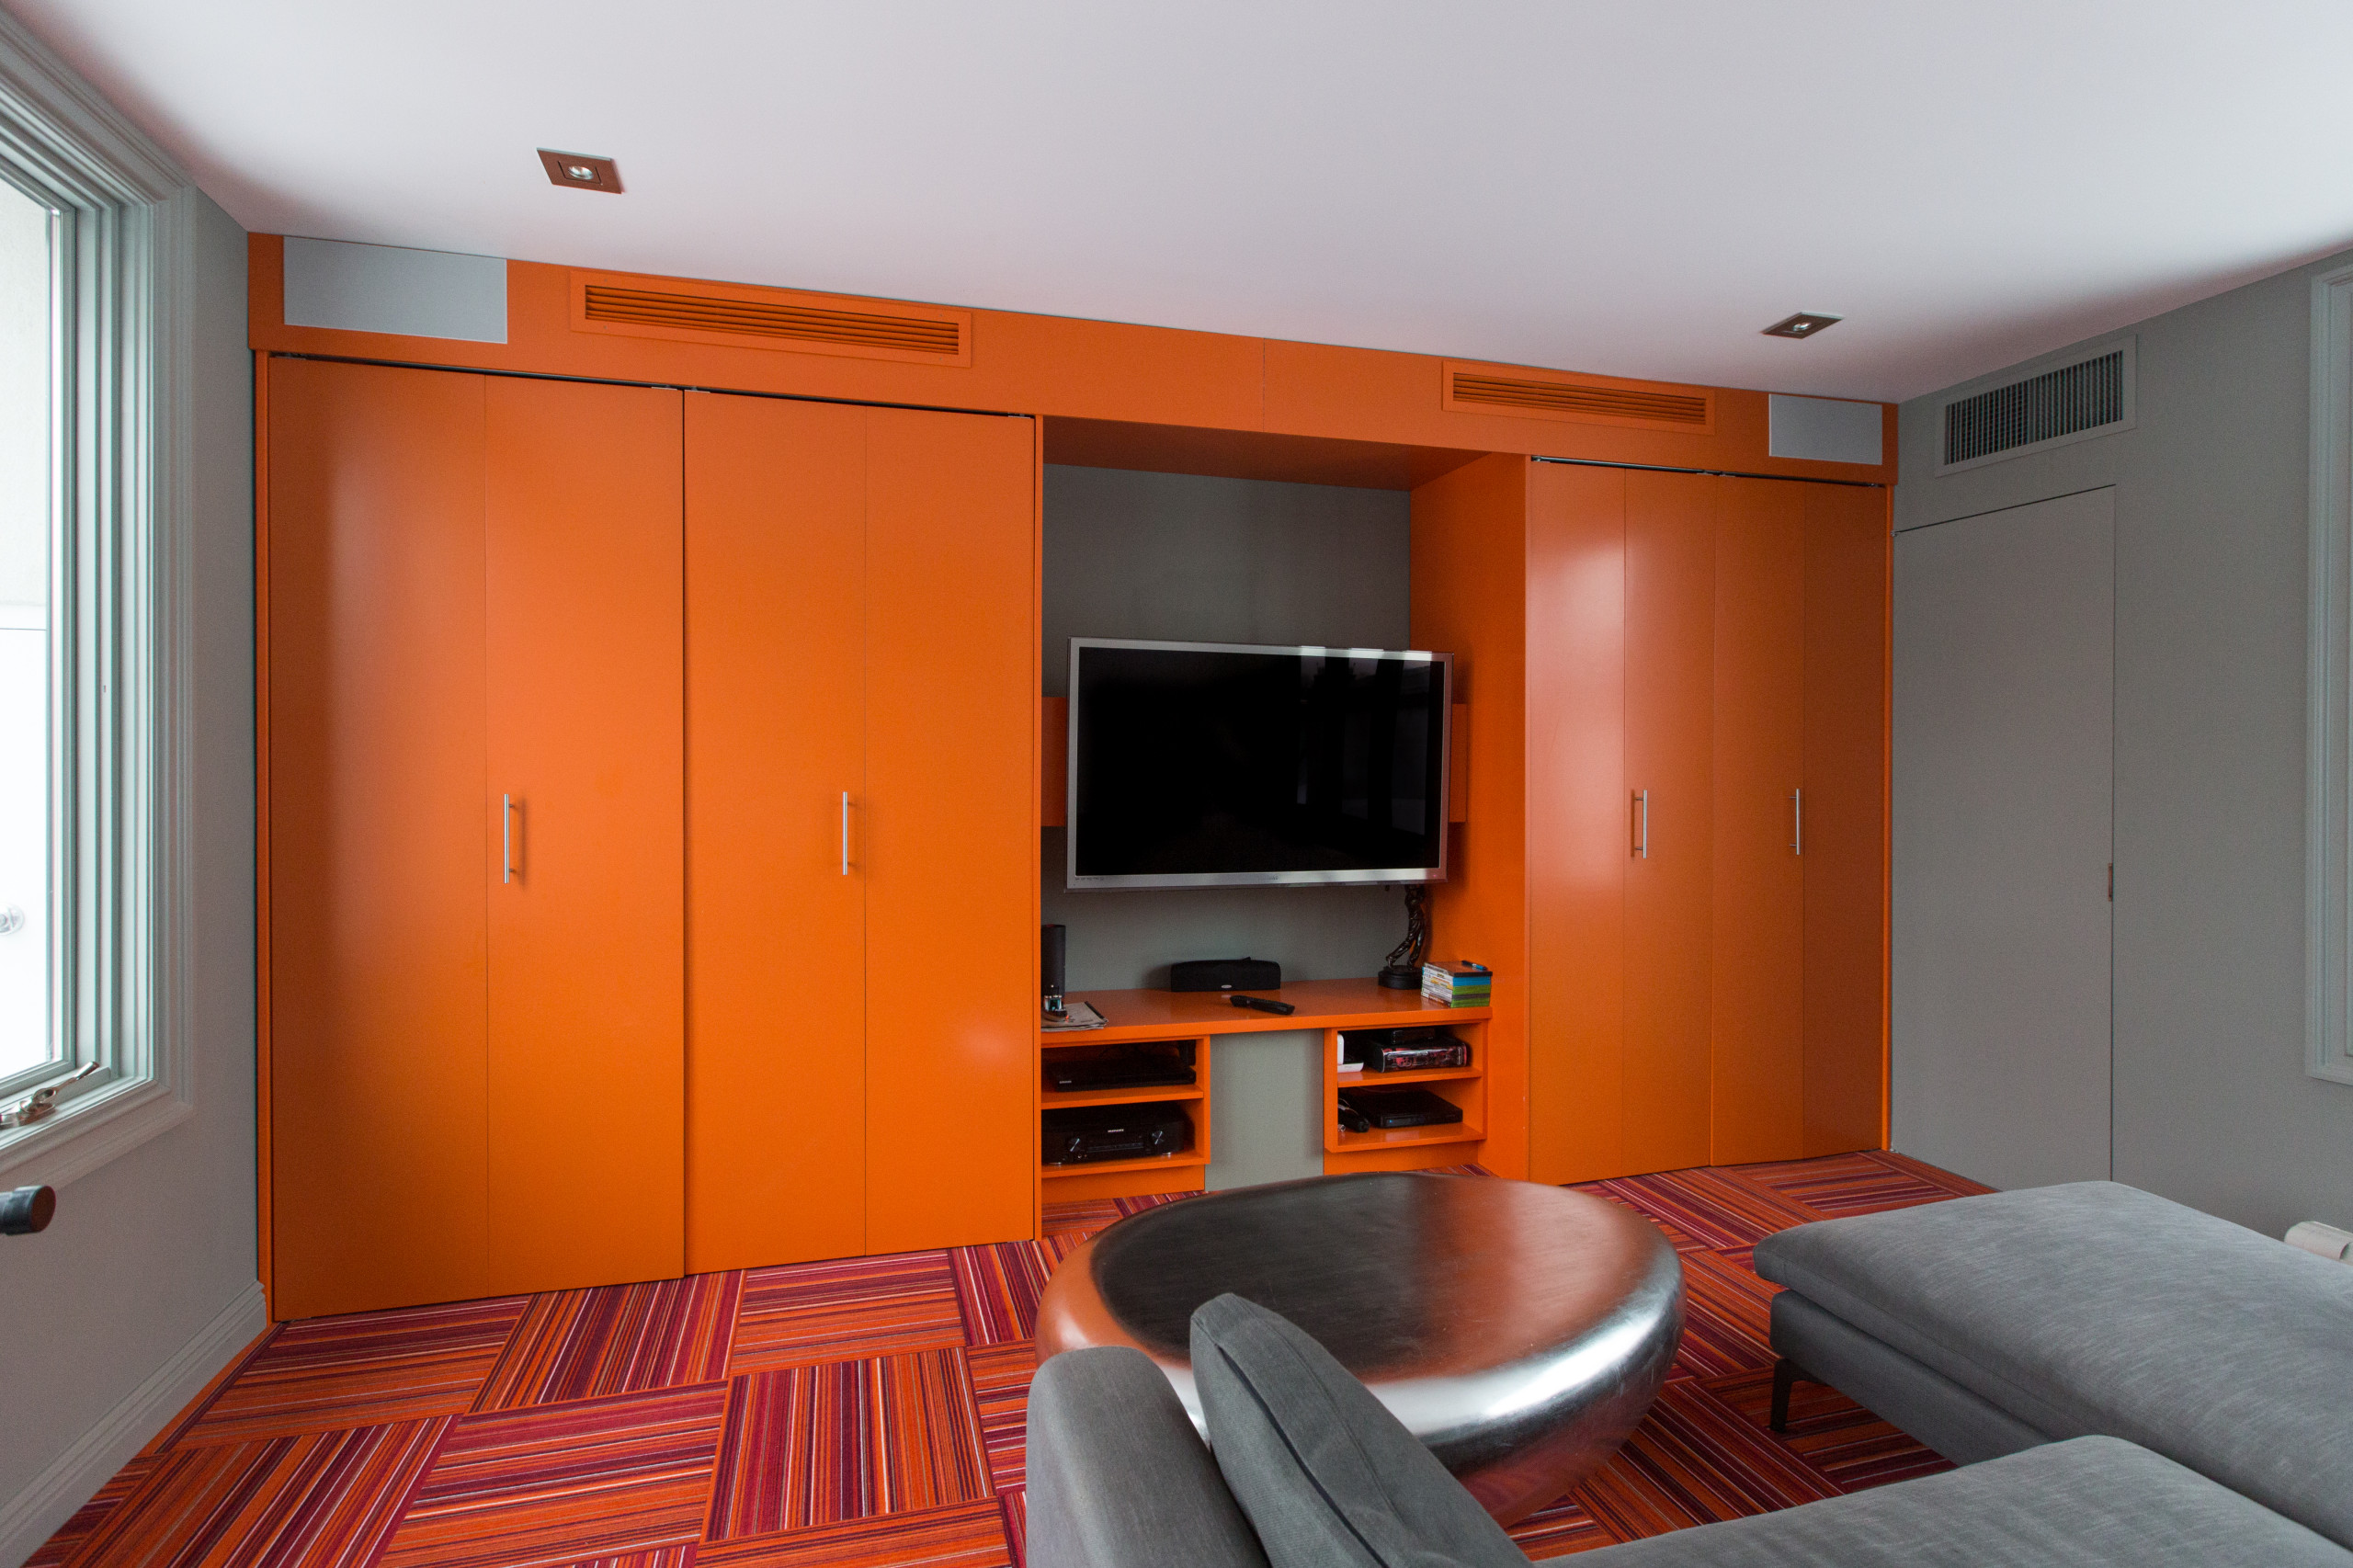 75 Modern Home Theater with Orange Walls Ideas You'll Love - April, 2023 |  Houzz